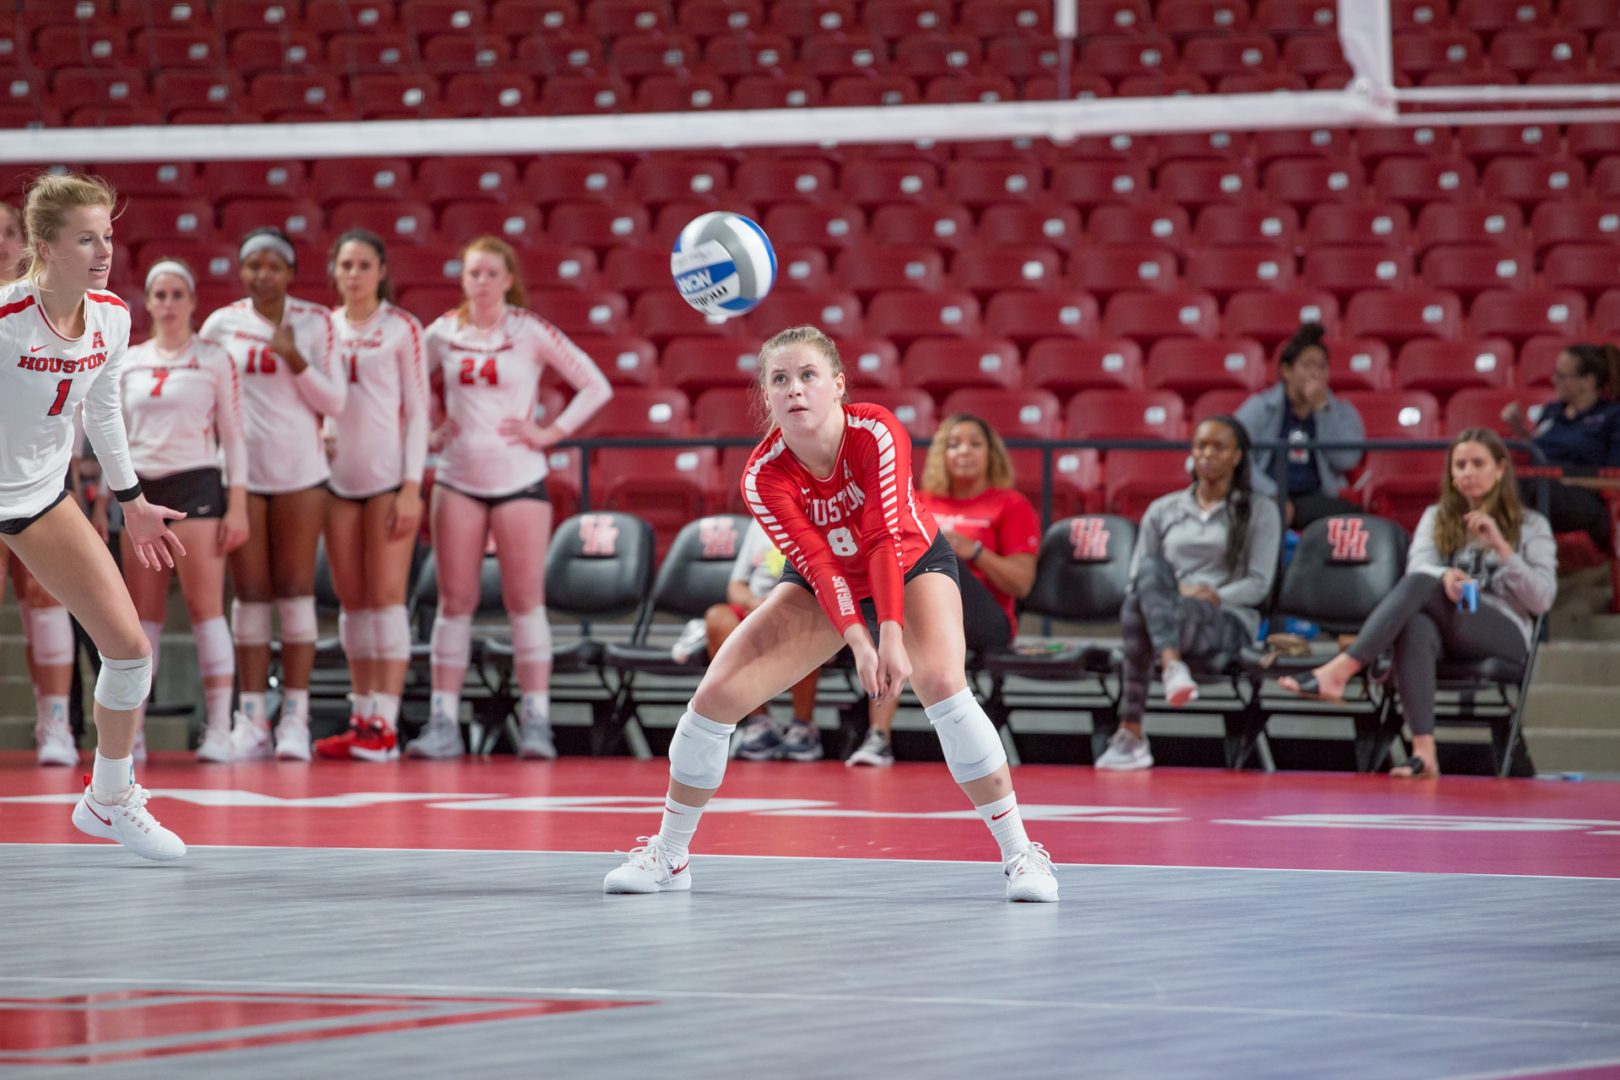 Senior libero Katie Karbo finished her home career at Houston with a match-high 29 digs in the Cougars' 3-1 loss Friday night at Fertitta Center. | Trevor Nolley/The Cougar